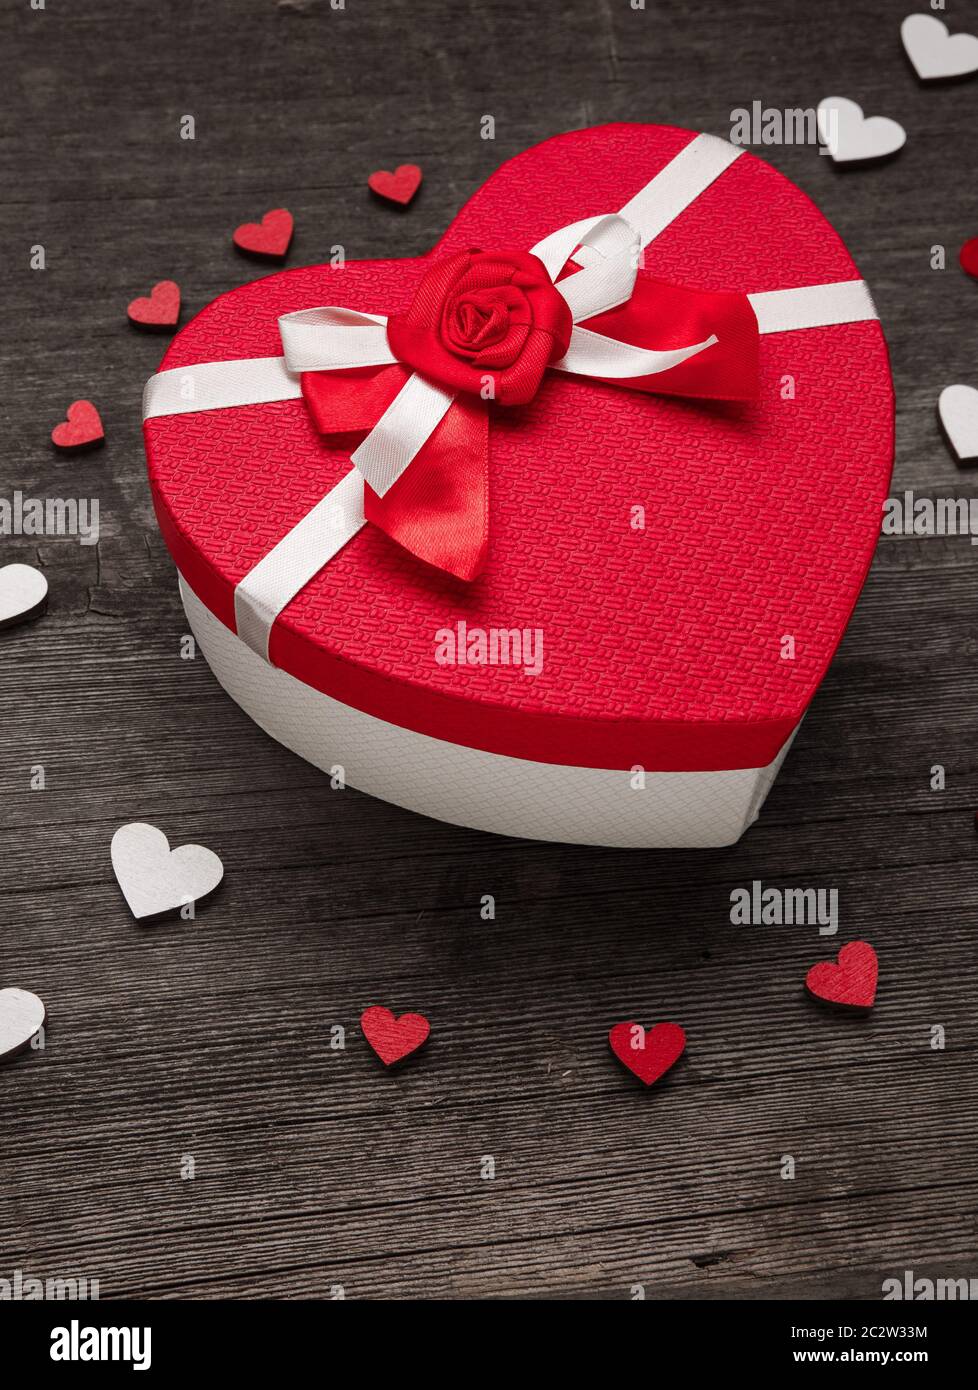 The cover of the box in the shape of a heart. Composition with red and white hearts on a wooden background. Valentines day concept with hearts and gif Stock Photo